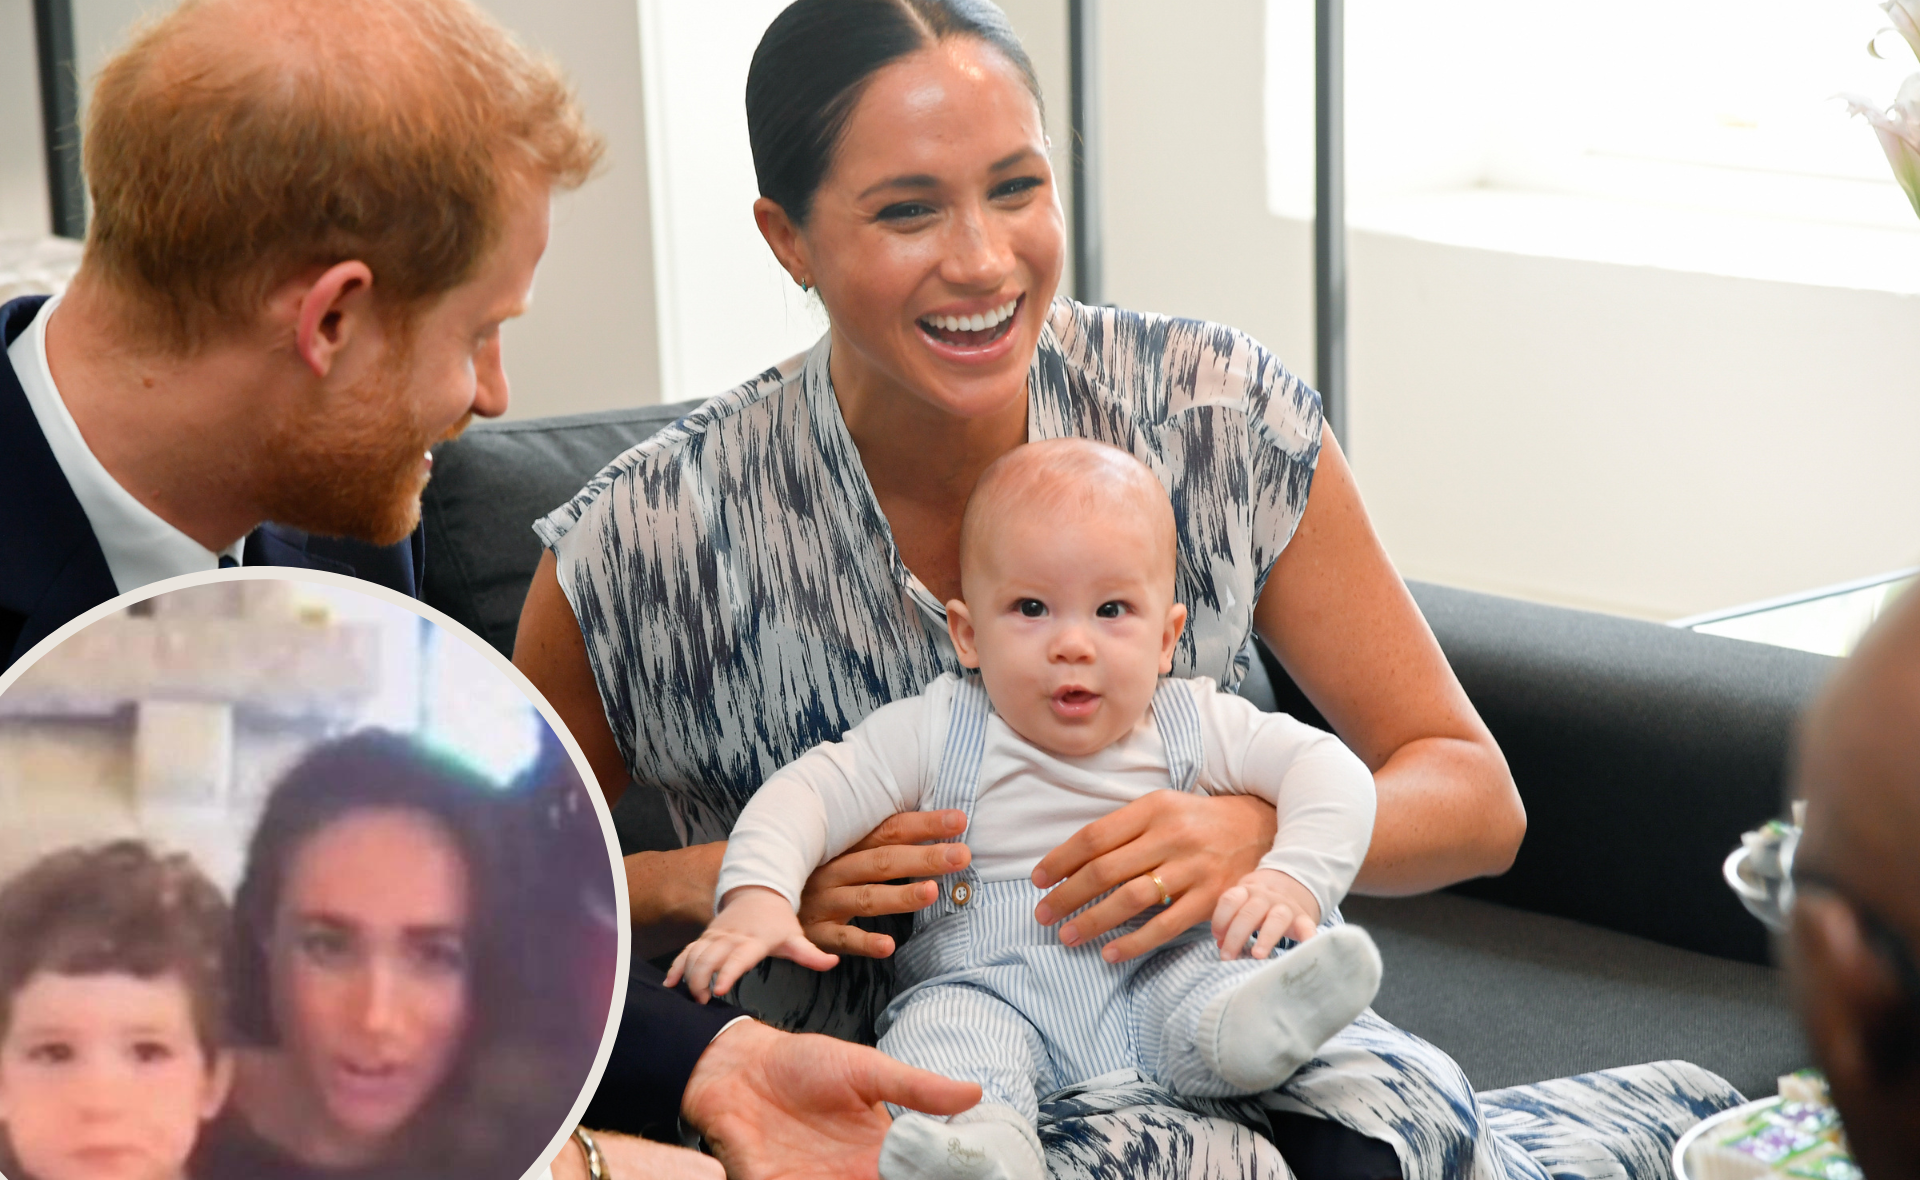 Leaked photo reveals how much Meghan Markle’s son Archie has grown!